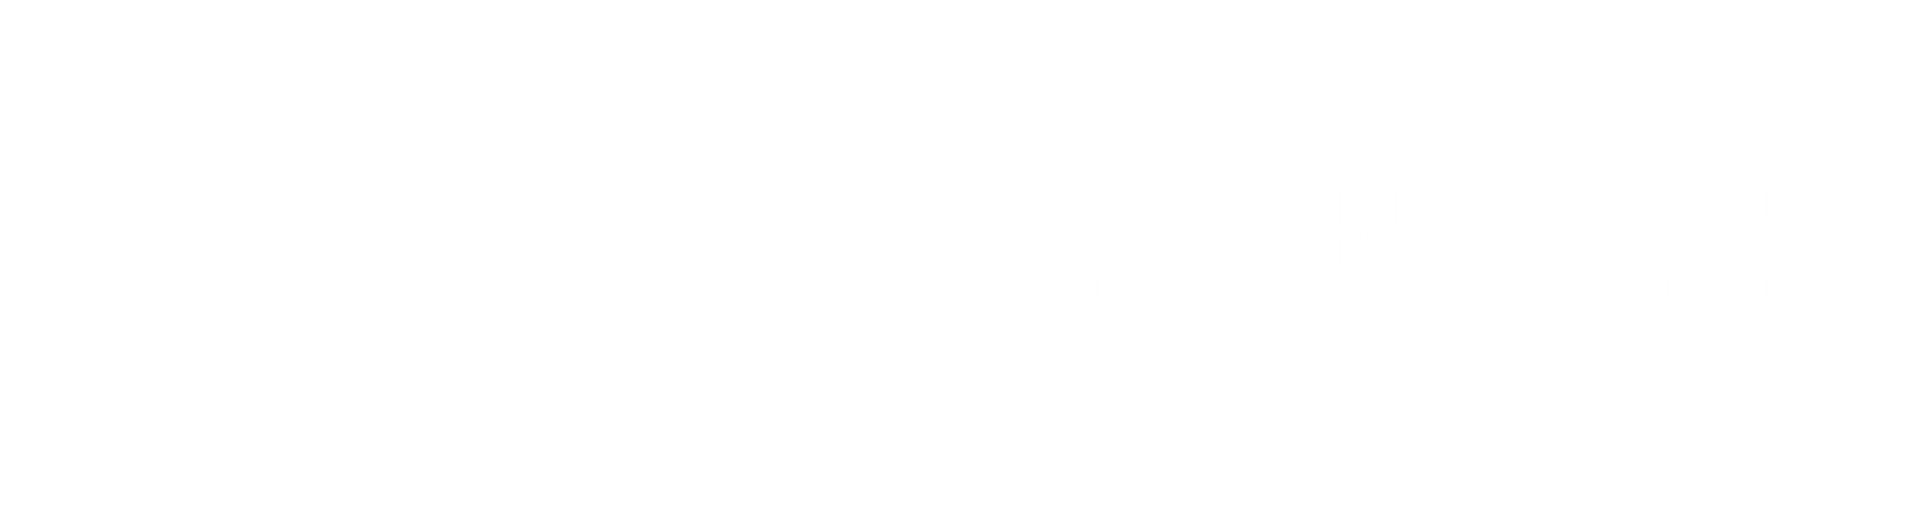 The logo of the IT company Automation Fans, positioned in the bottom left corner